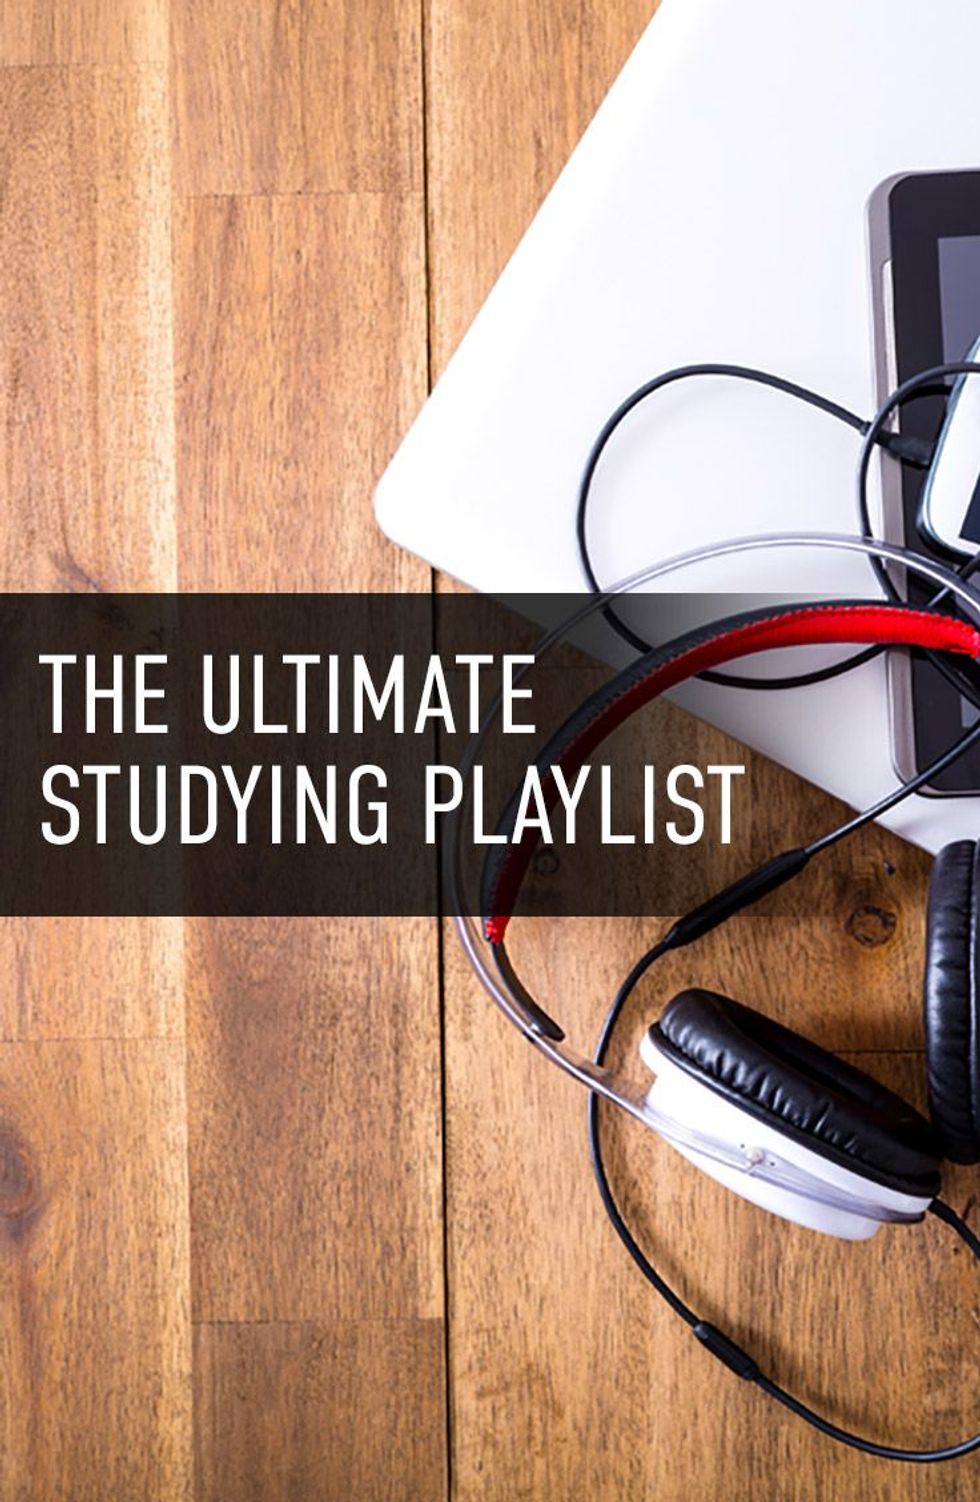 The Best Studying Playlist